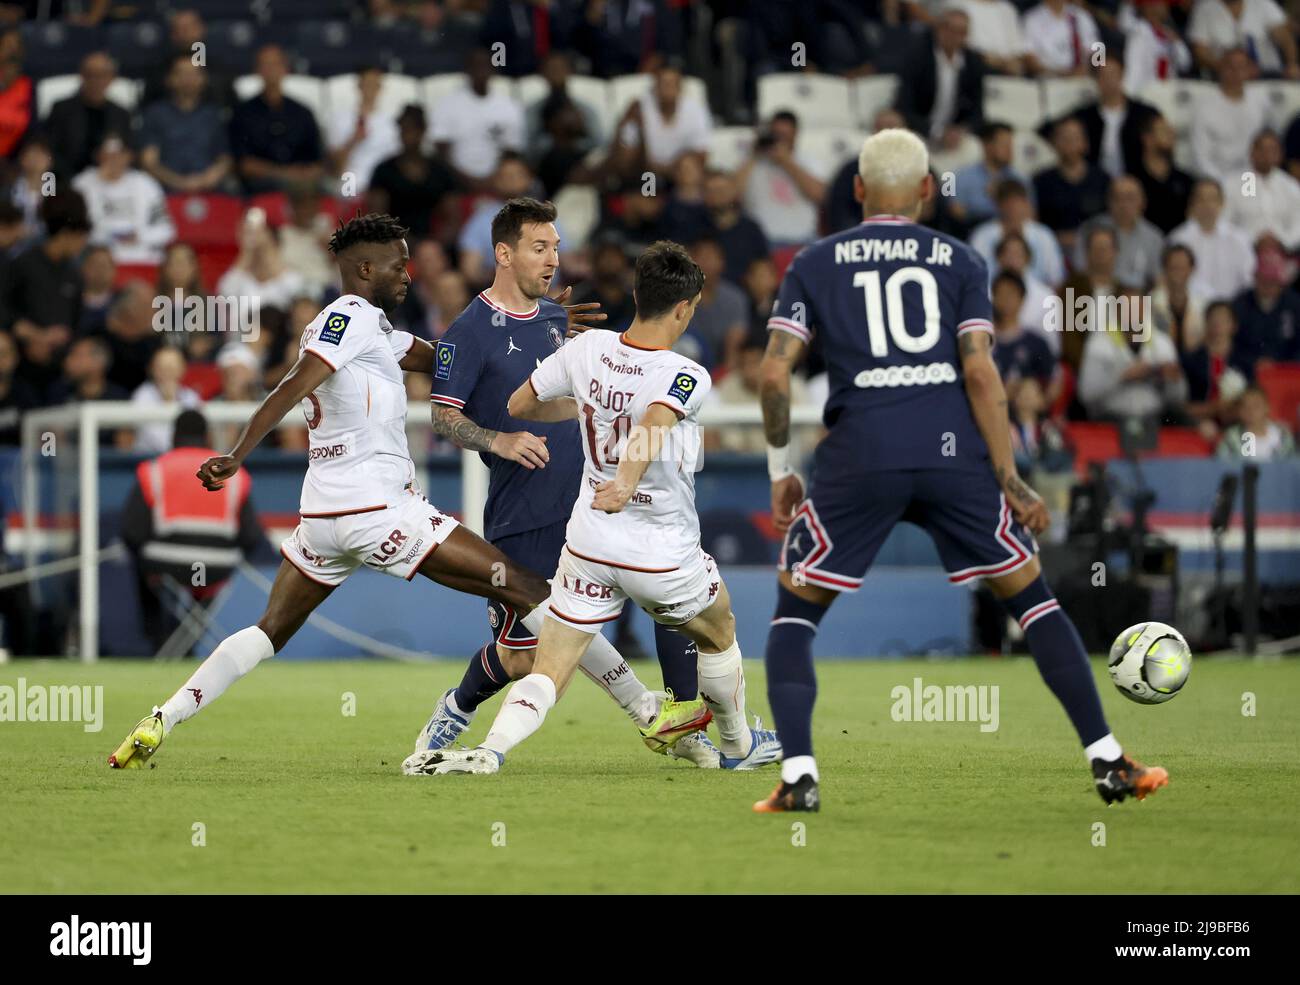 Lionel Messi Of Psg During The French Championship Ligue 1 Football Match Between Paris Saint Germain Psg And Fc Metz On May 21 22 At Parc Des Princes Stadium In Paris France